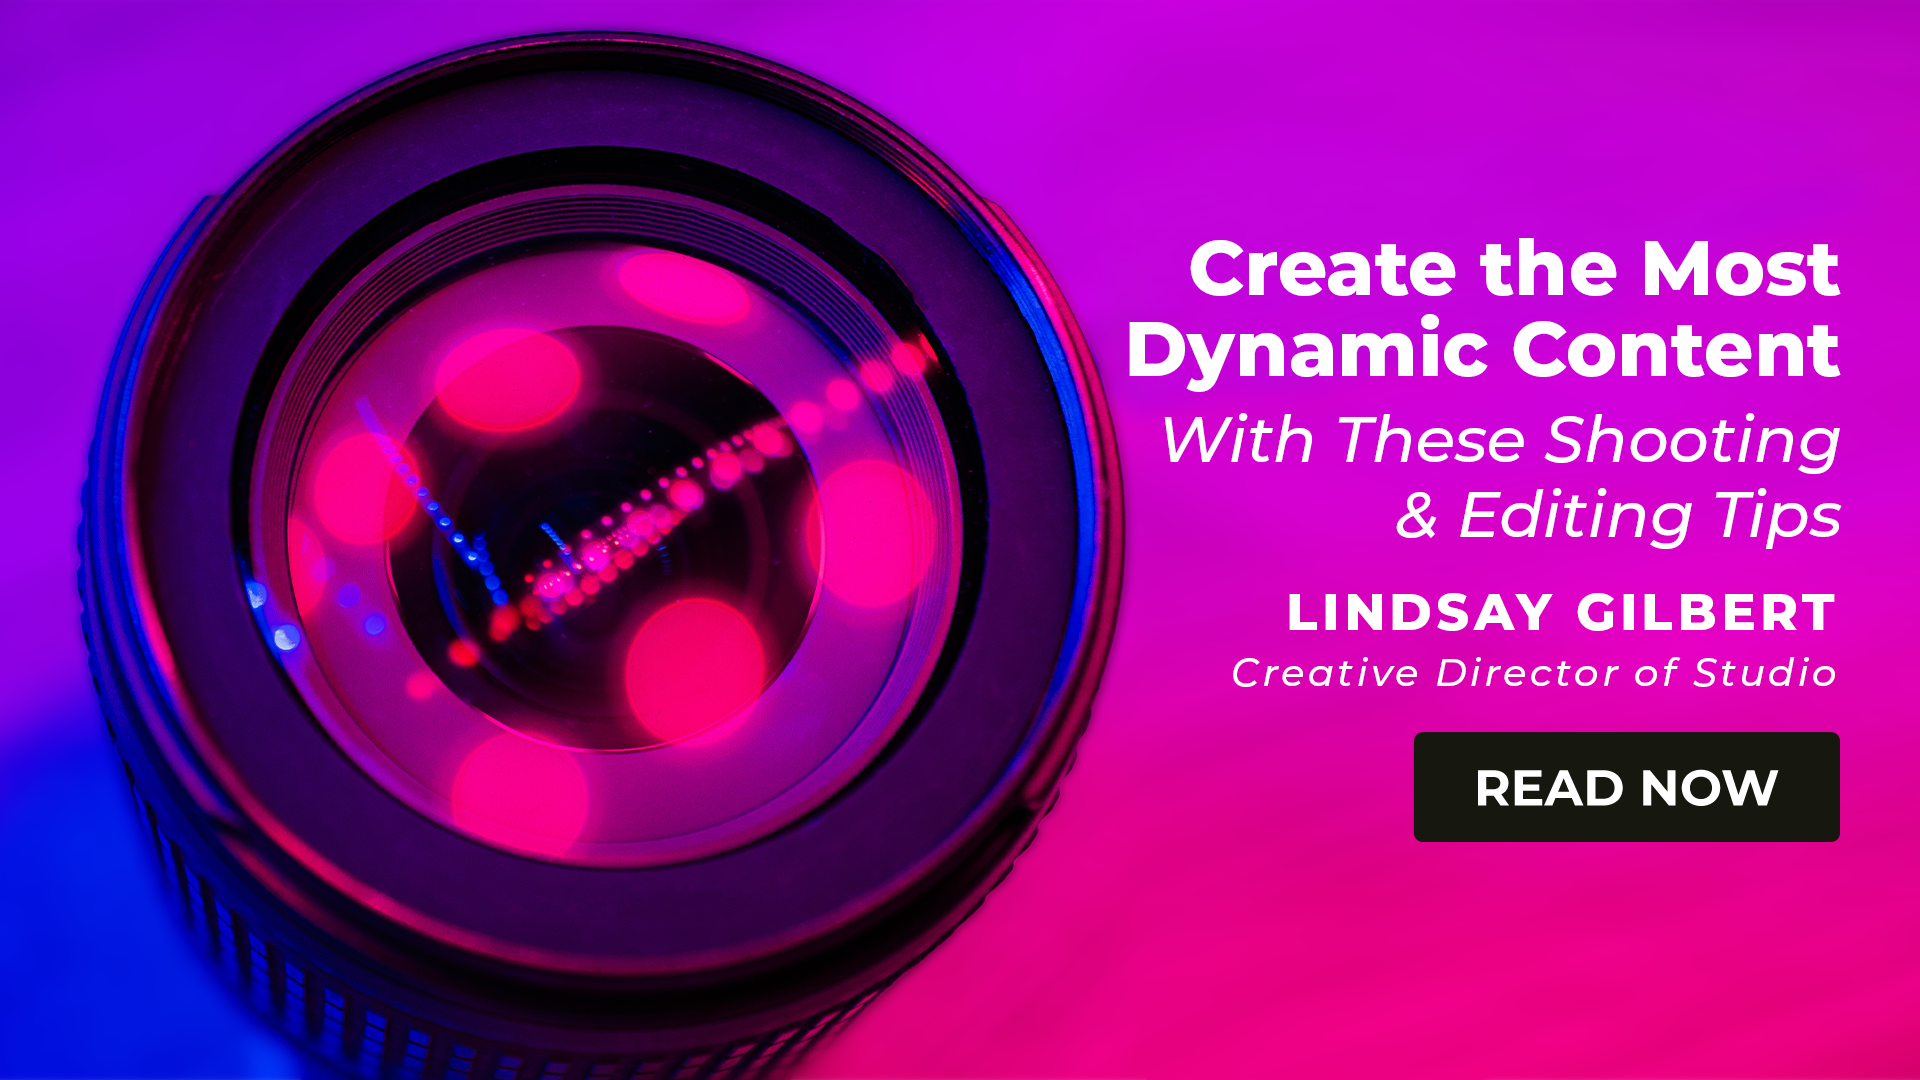 Shooting &amp; Editing Tips for Dynamic Digital
Content